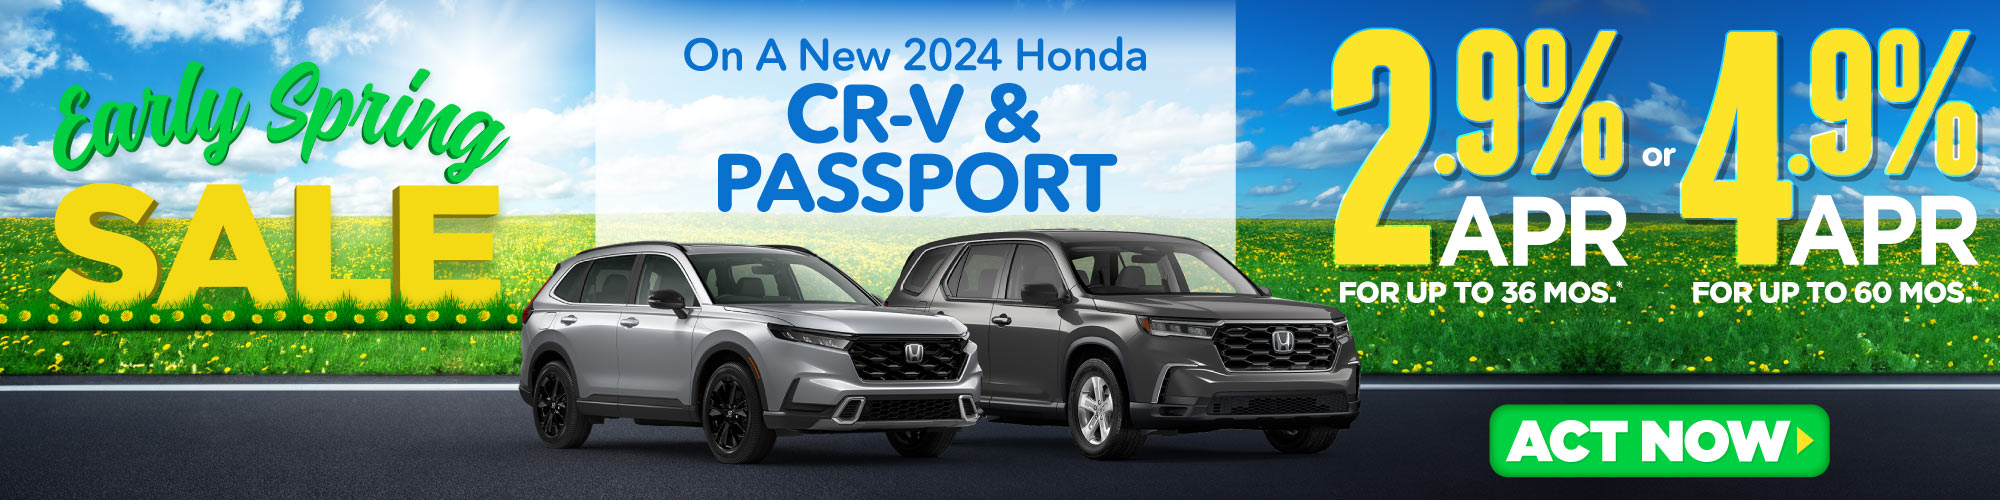 New 2022 Honda Accord or Civic | 2.9% APR for up to 24-48 months or 3.9% APR for up to 49-60 months or 4.9% APR for up to 61-72 months | Act Now